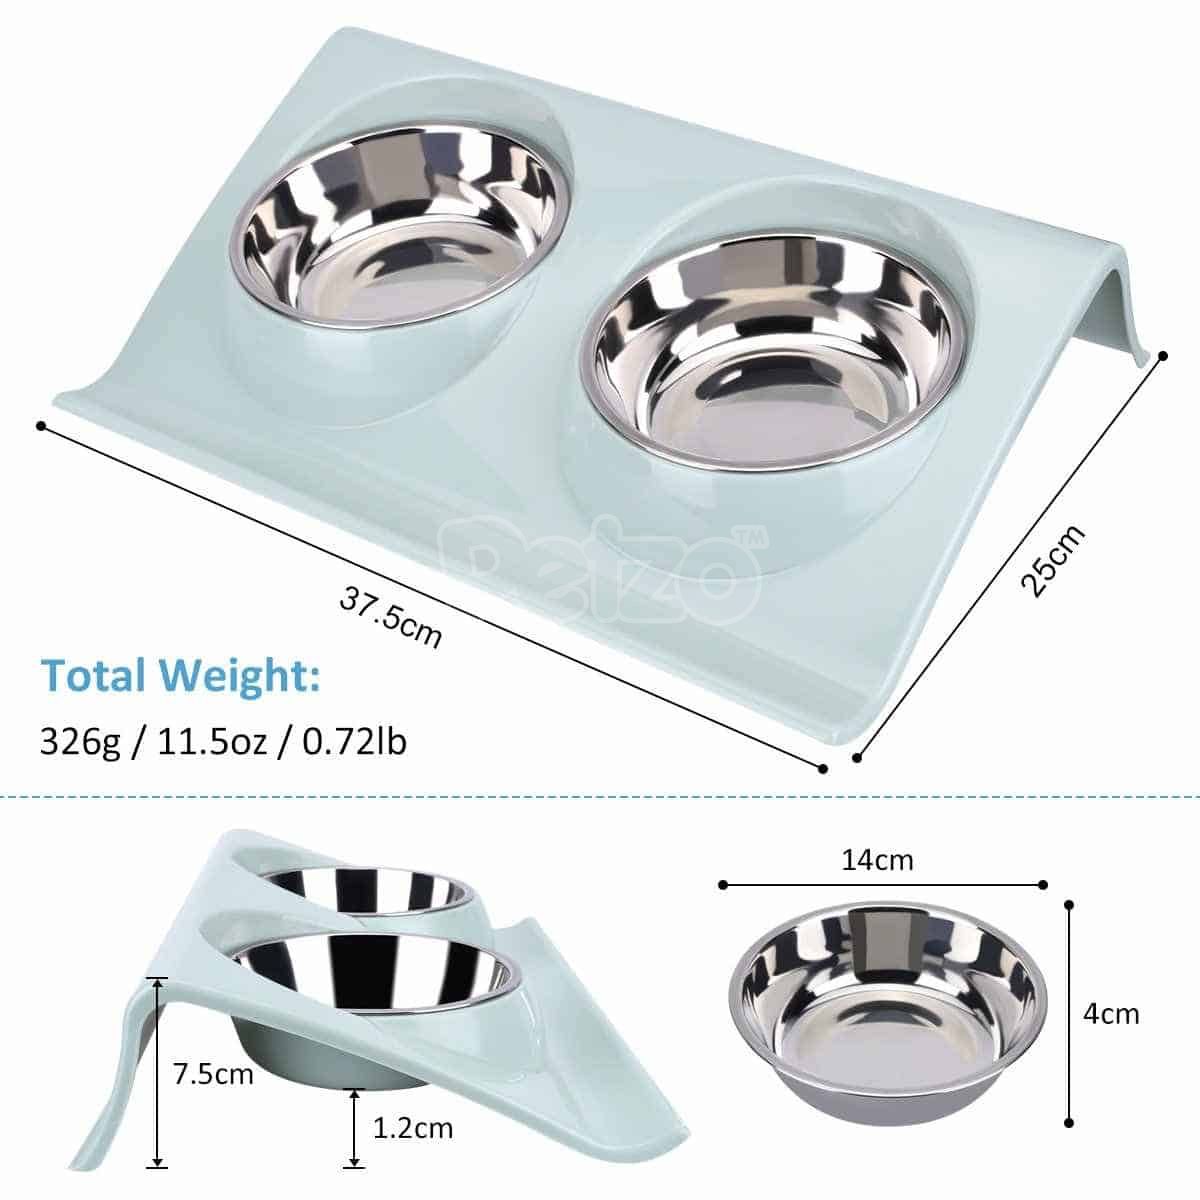 https://www.petzo.net/wp-content/uploads/2021/03/Double-Dog-Cat-Bowls-Stainless-Steel-Pet-Bowls-Non-Spill-Station-Non-Skid-Silicone-Base-Holder.jpg_q50-1.jpg